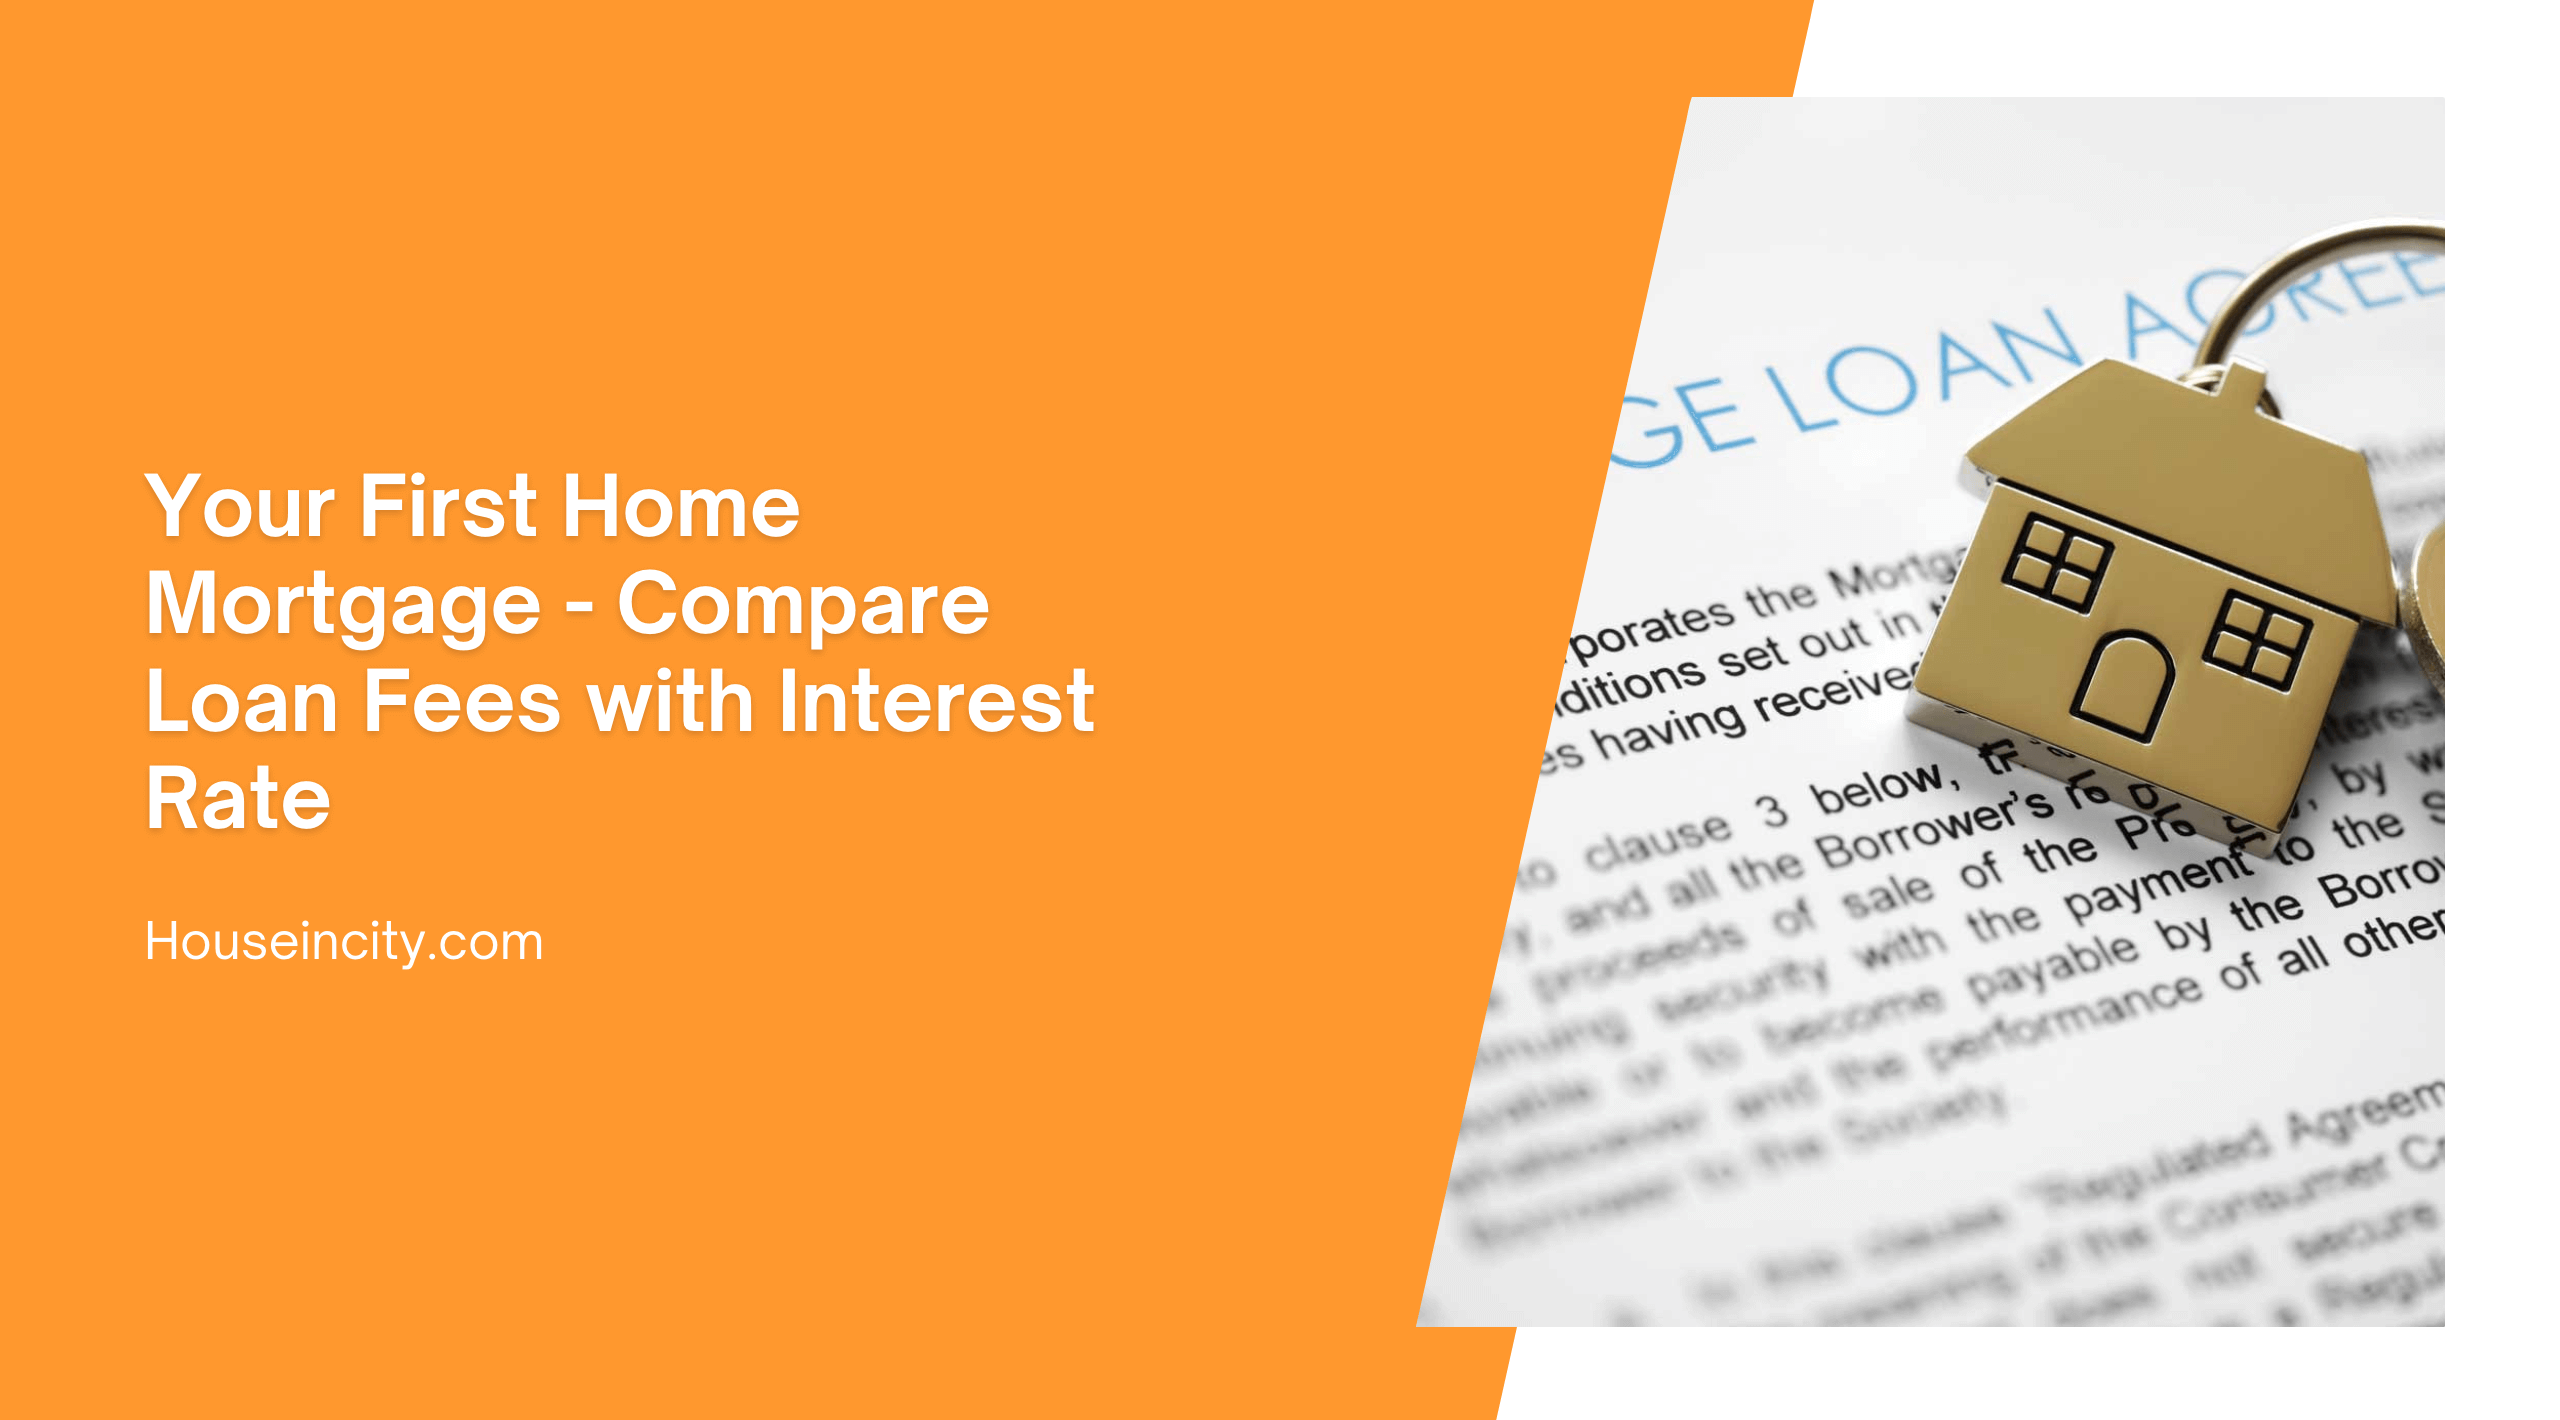 Your First Home Mortgage - Compare Loan Fees with Interest Rate